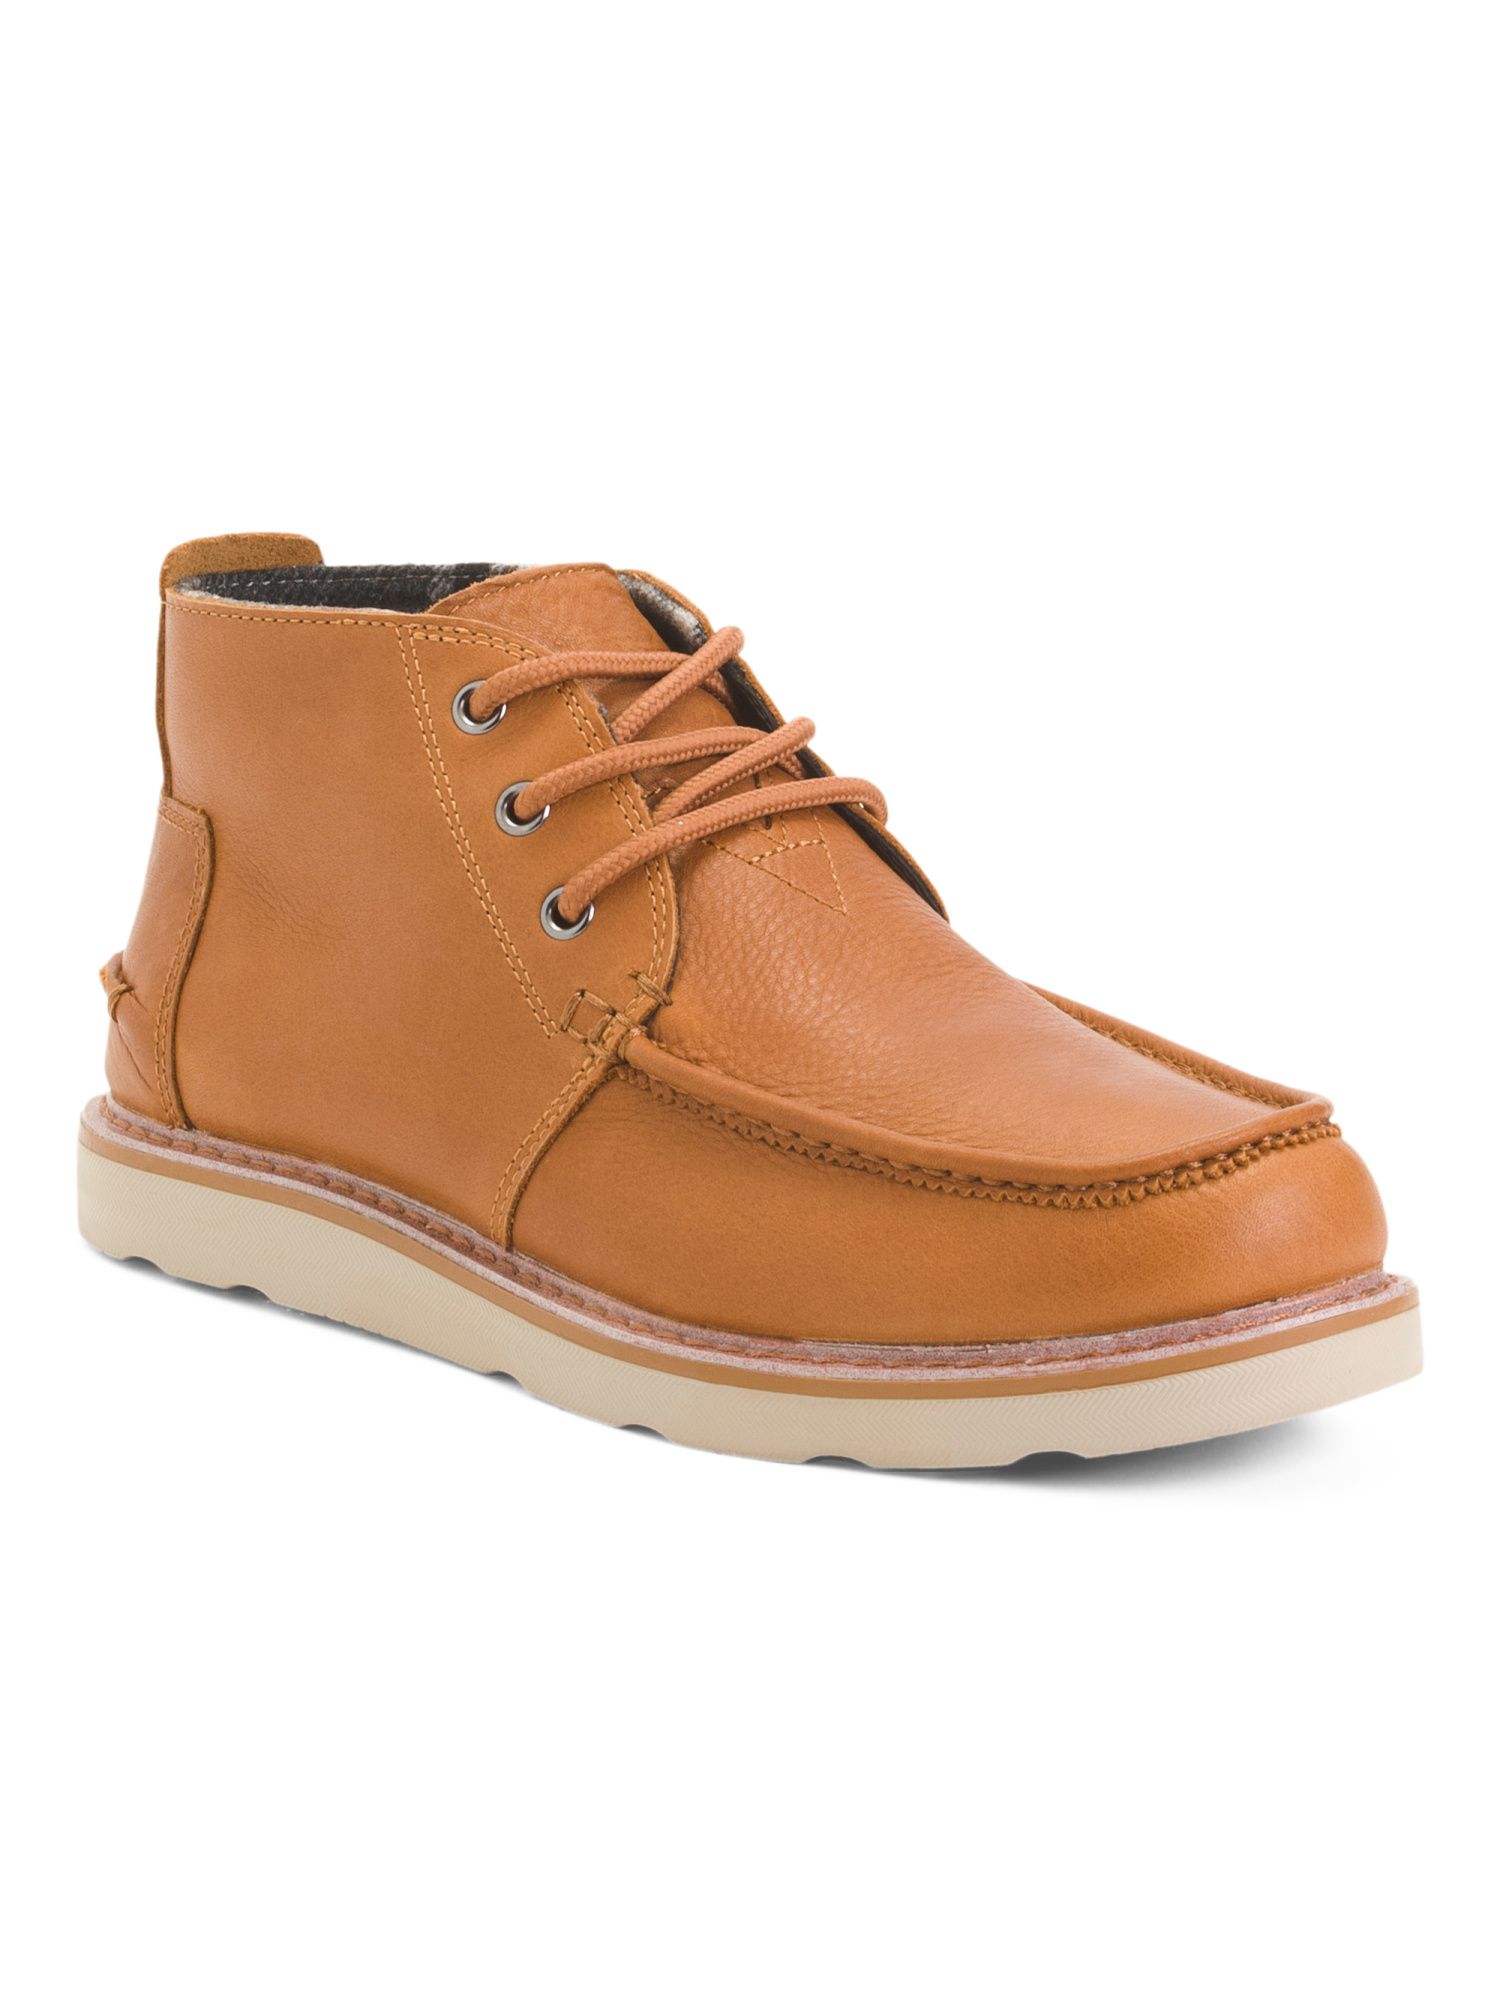 Men's Leather Waterproof Chukka Boots With Extended Sizes | Men's Boots | Marshalls | Marshalls